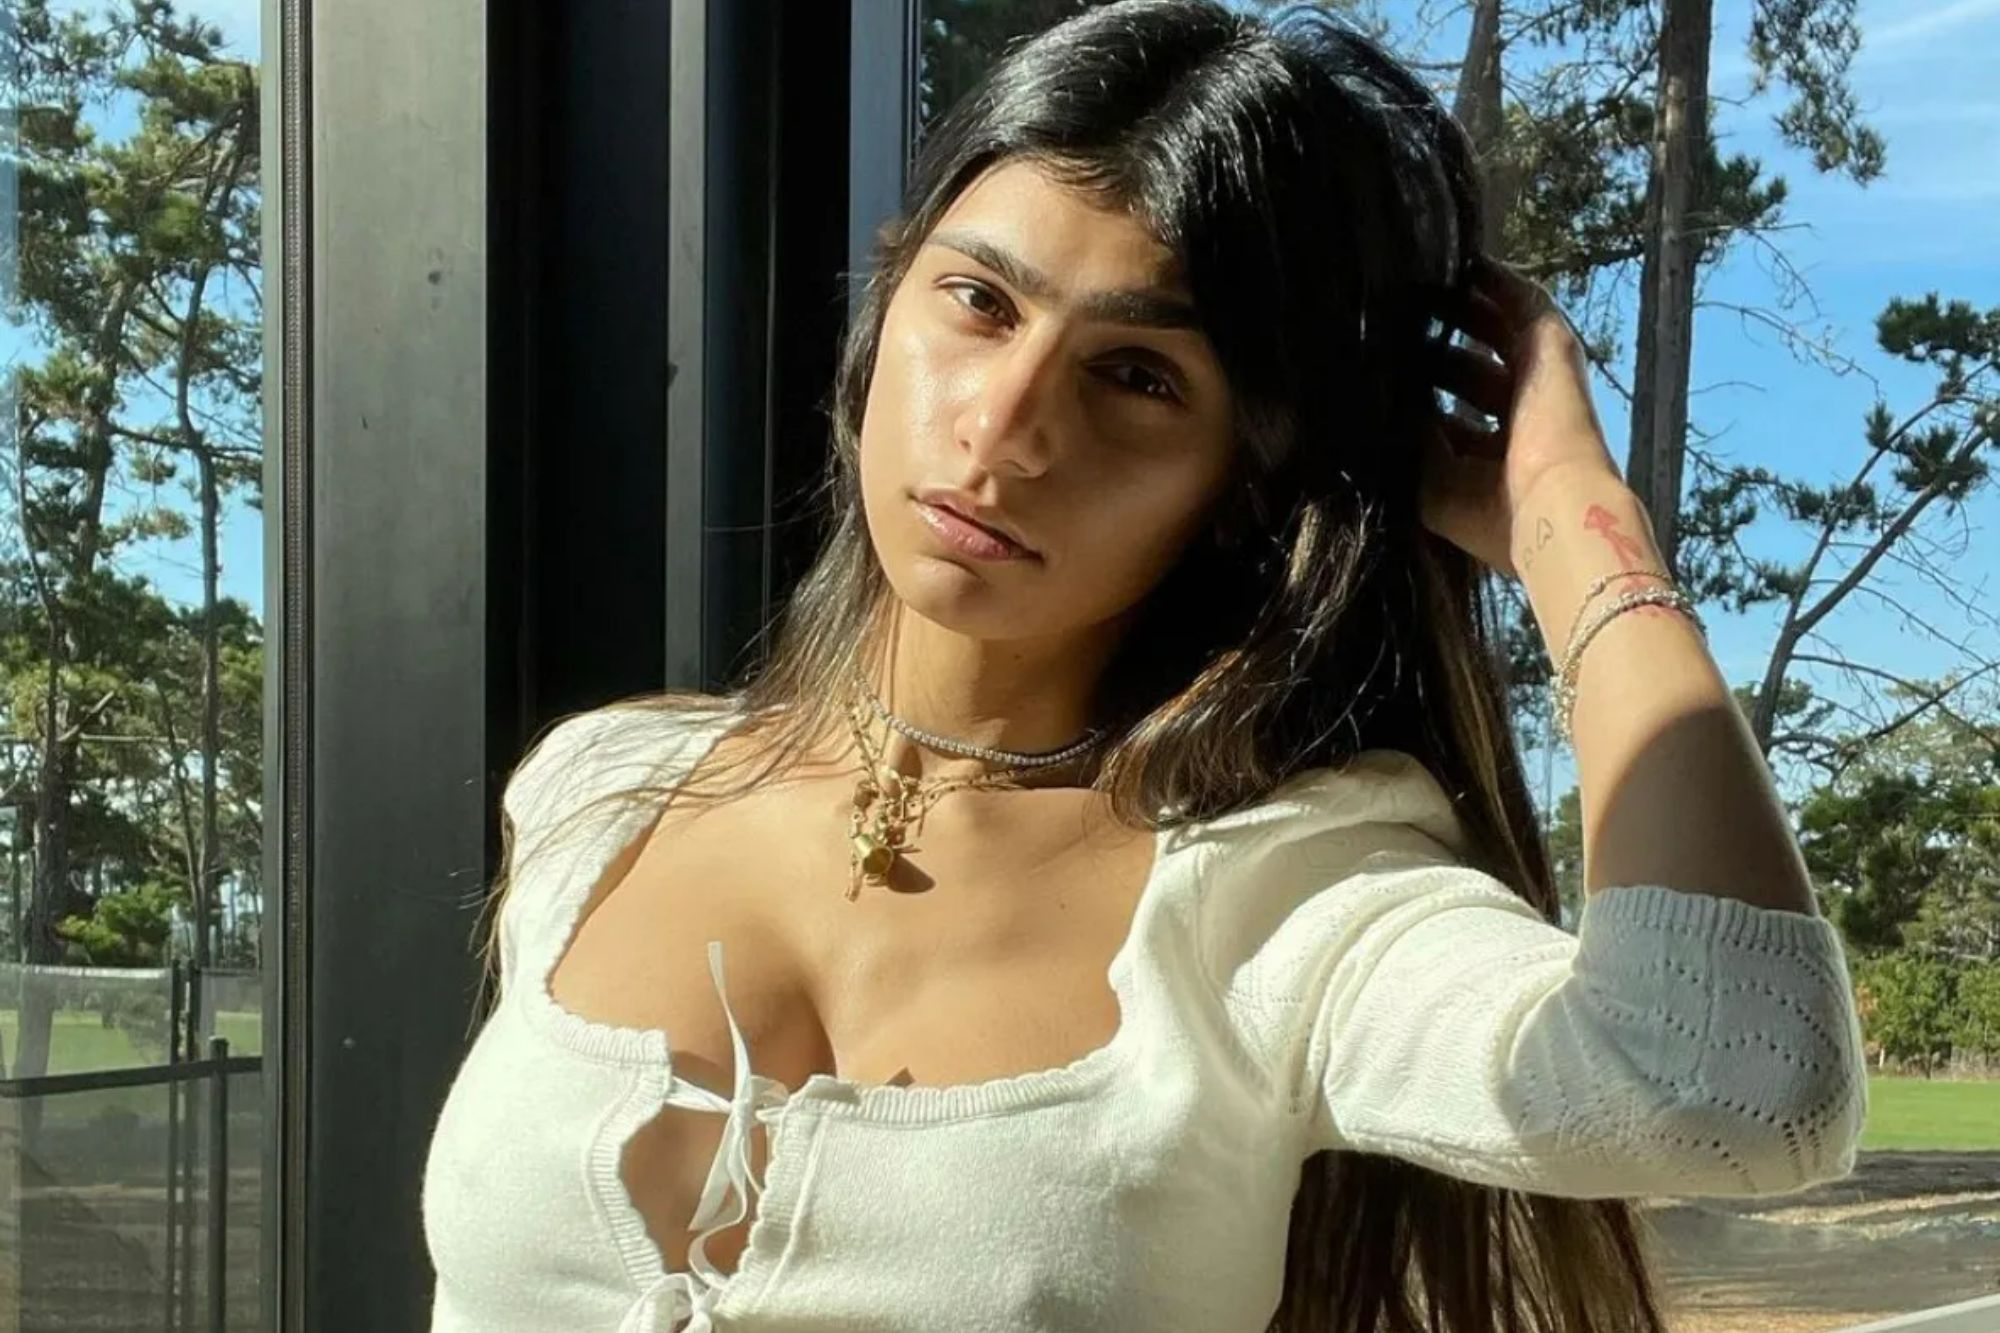 andy yaggie recommends mia khalifa song drake pic